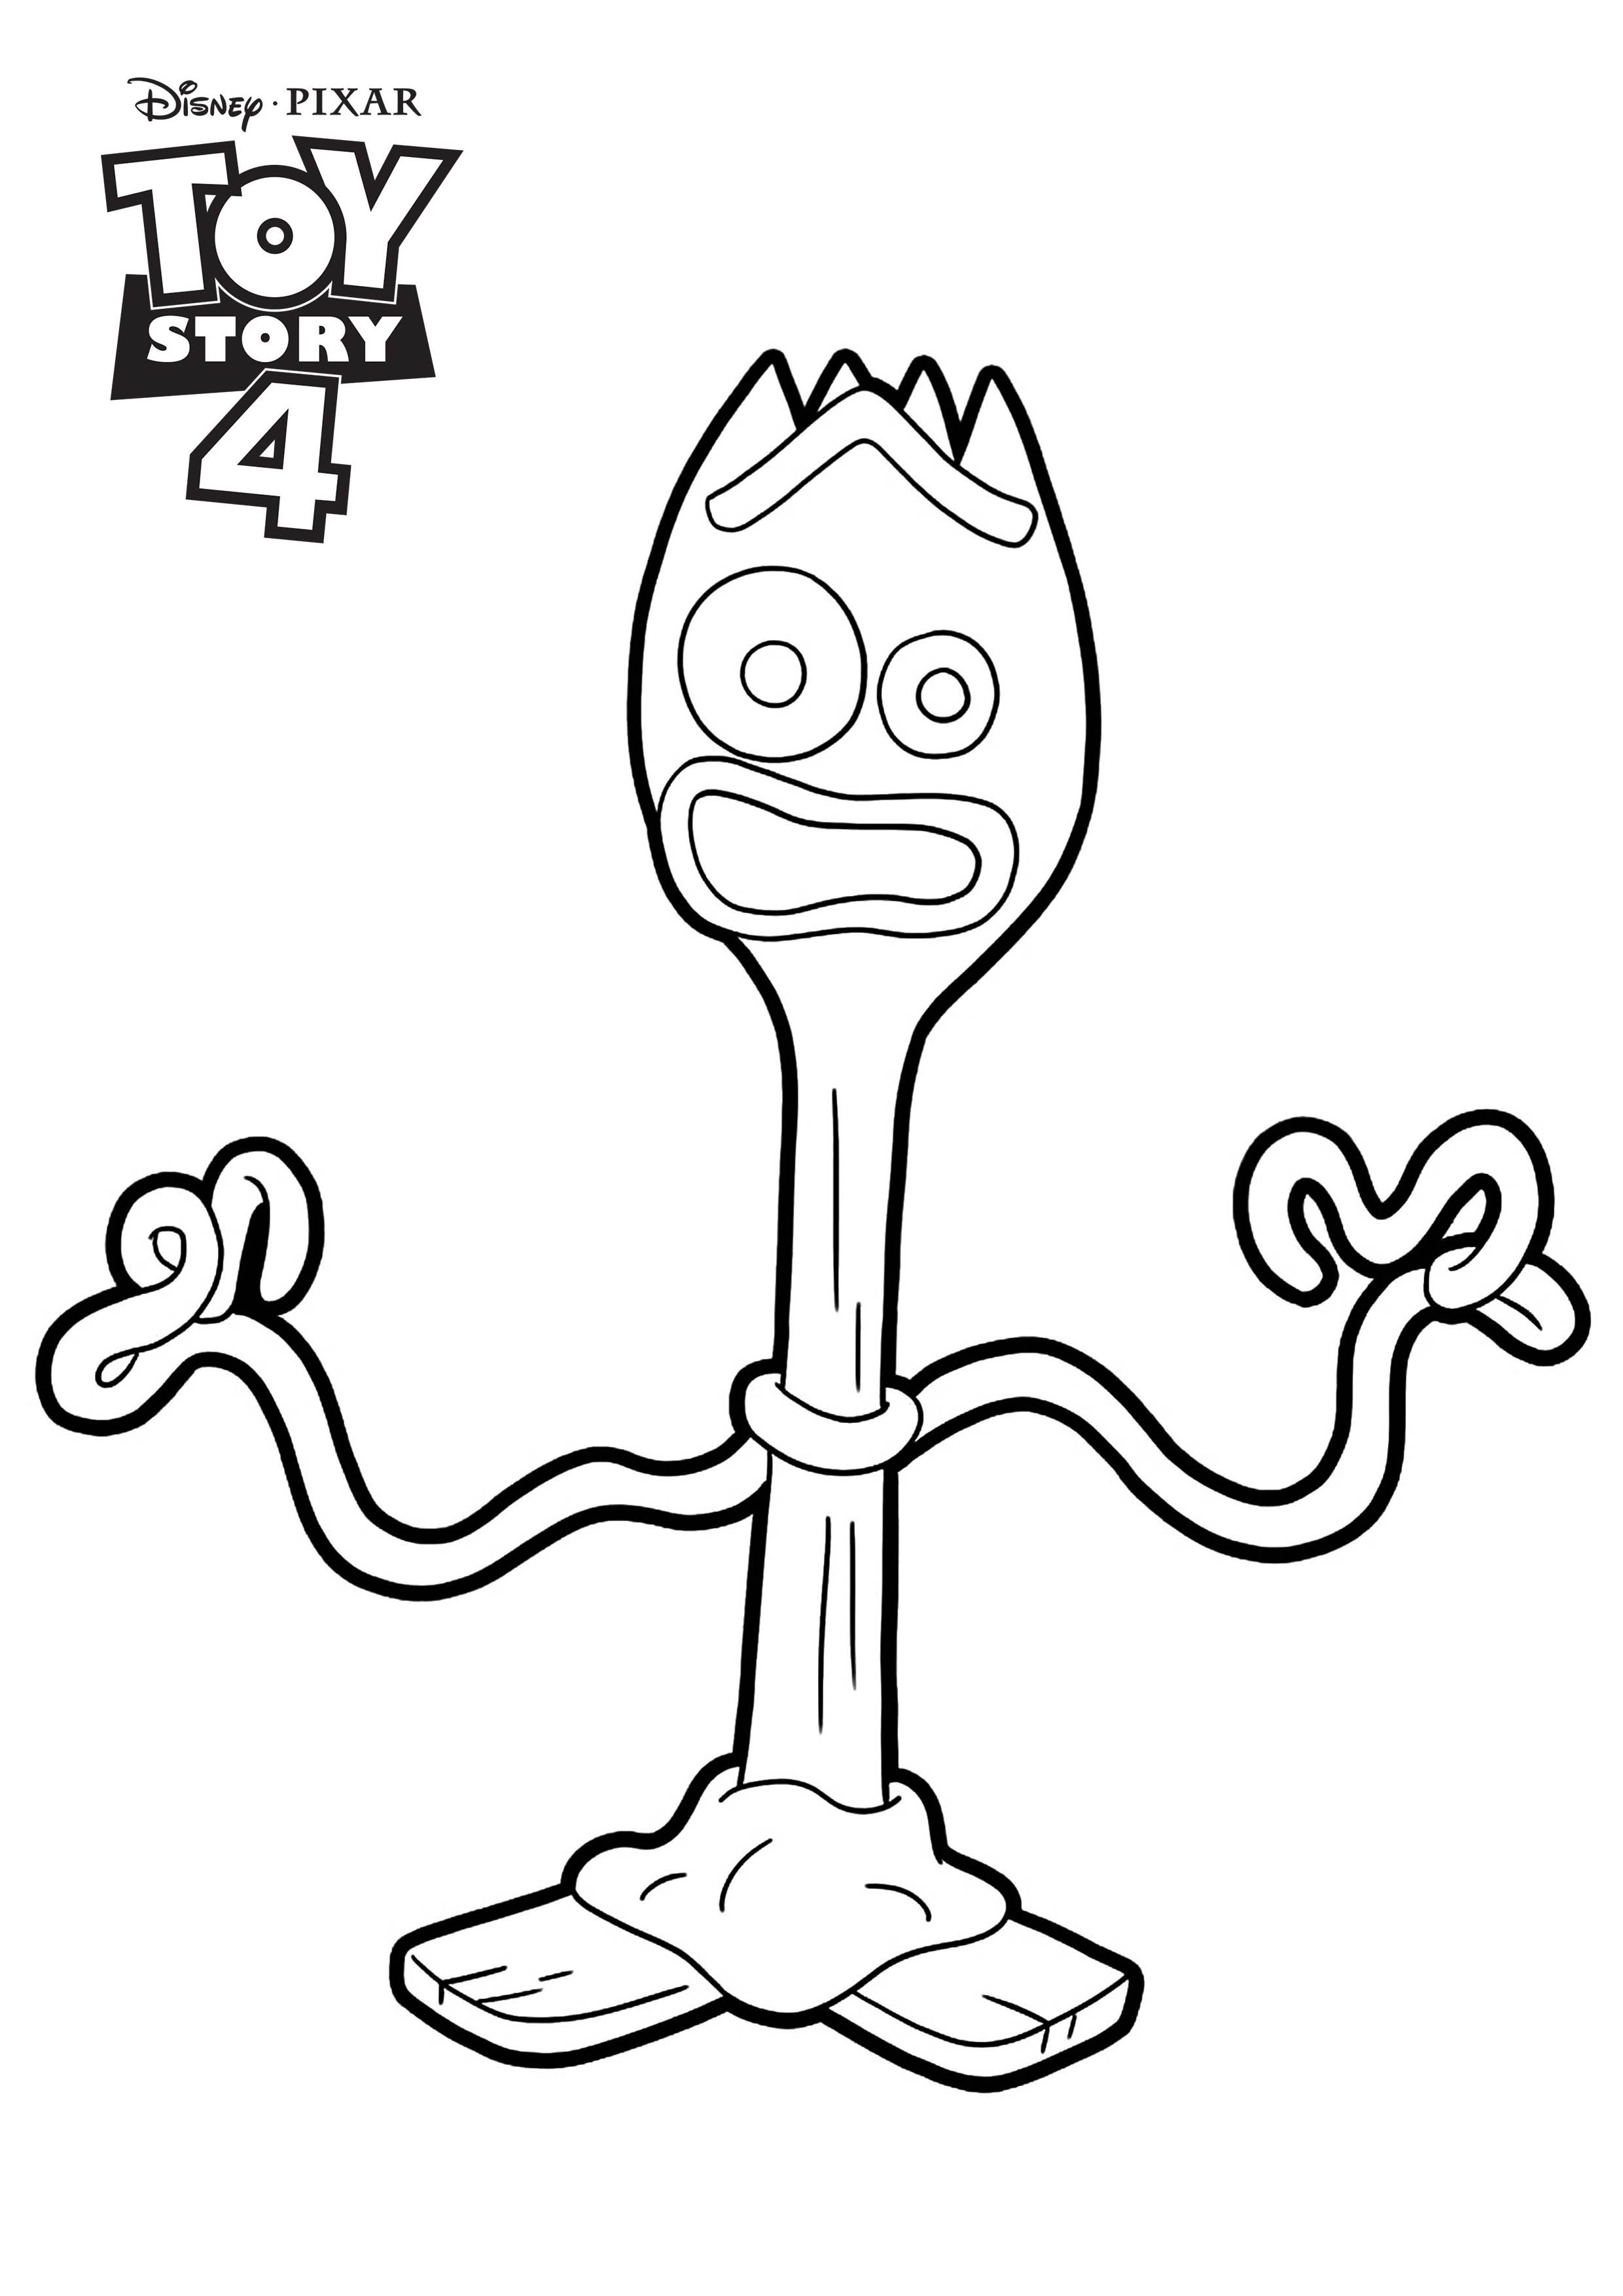 Forky Toy Story 4 Coloring Page Disney Pixar Toy Story